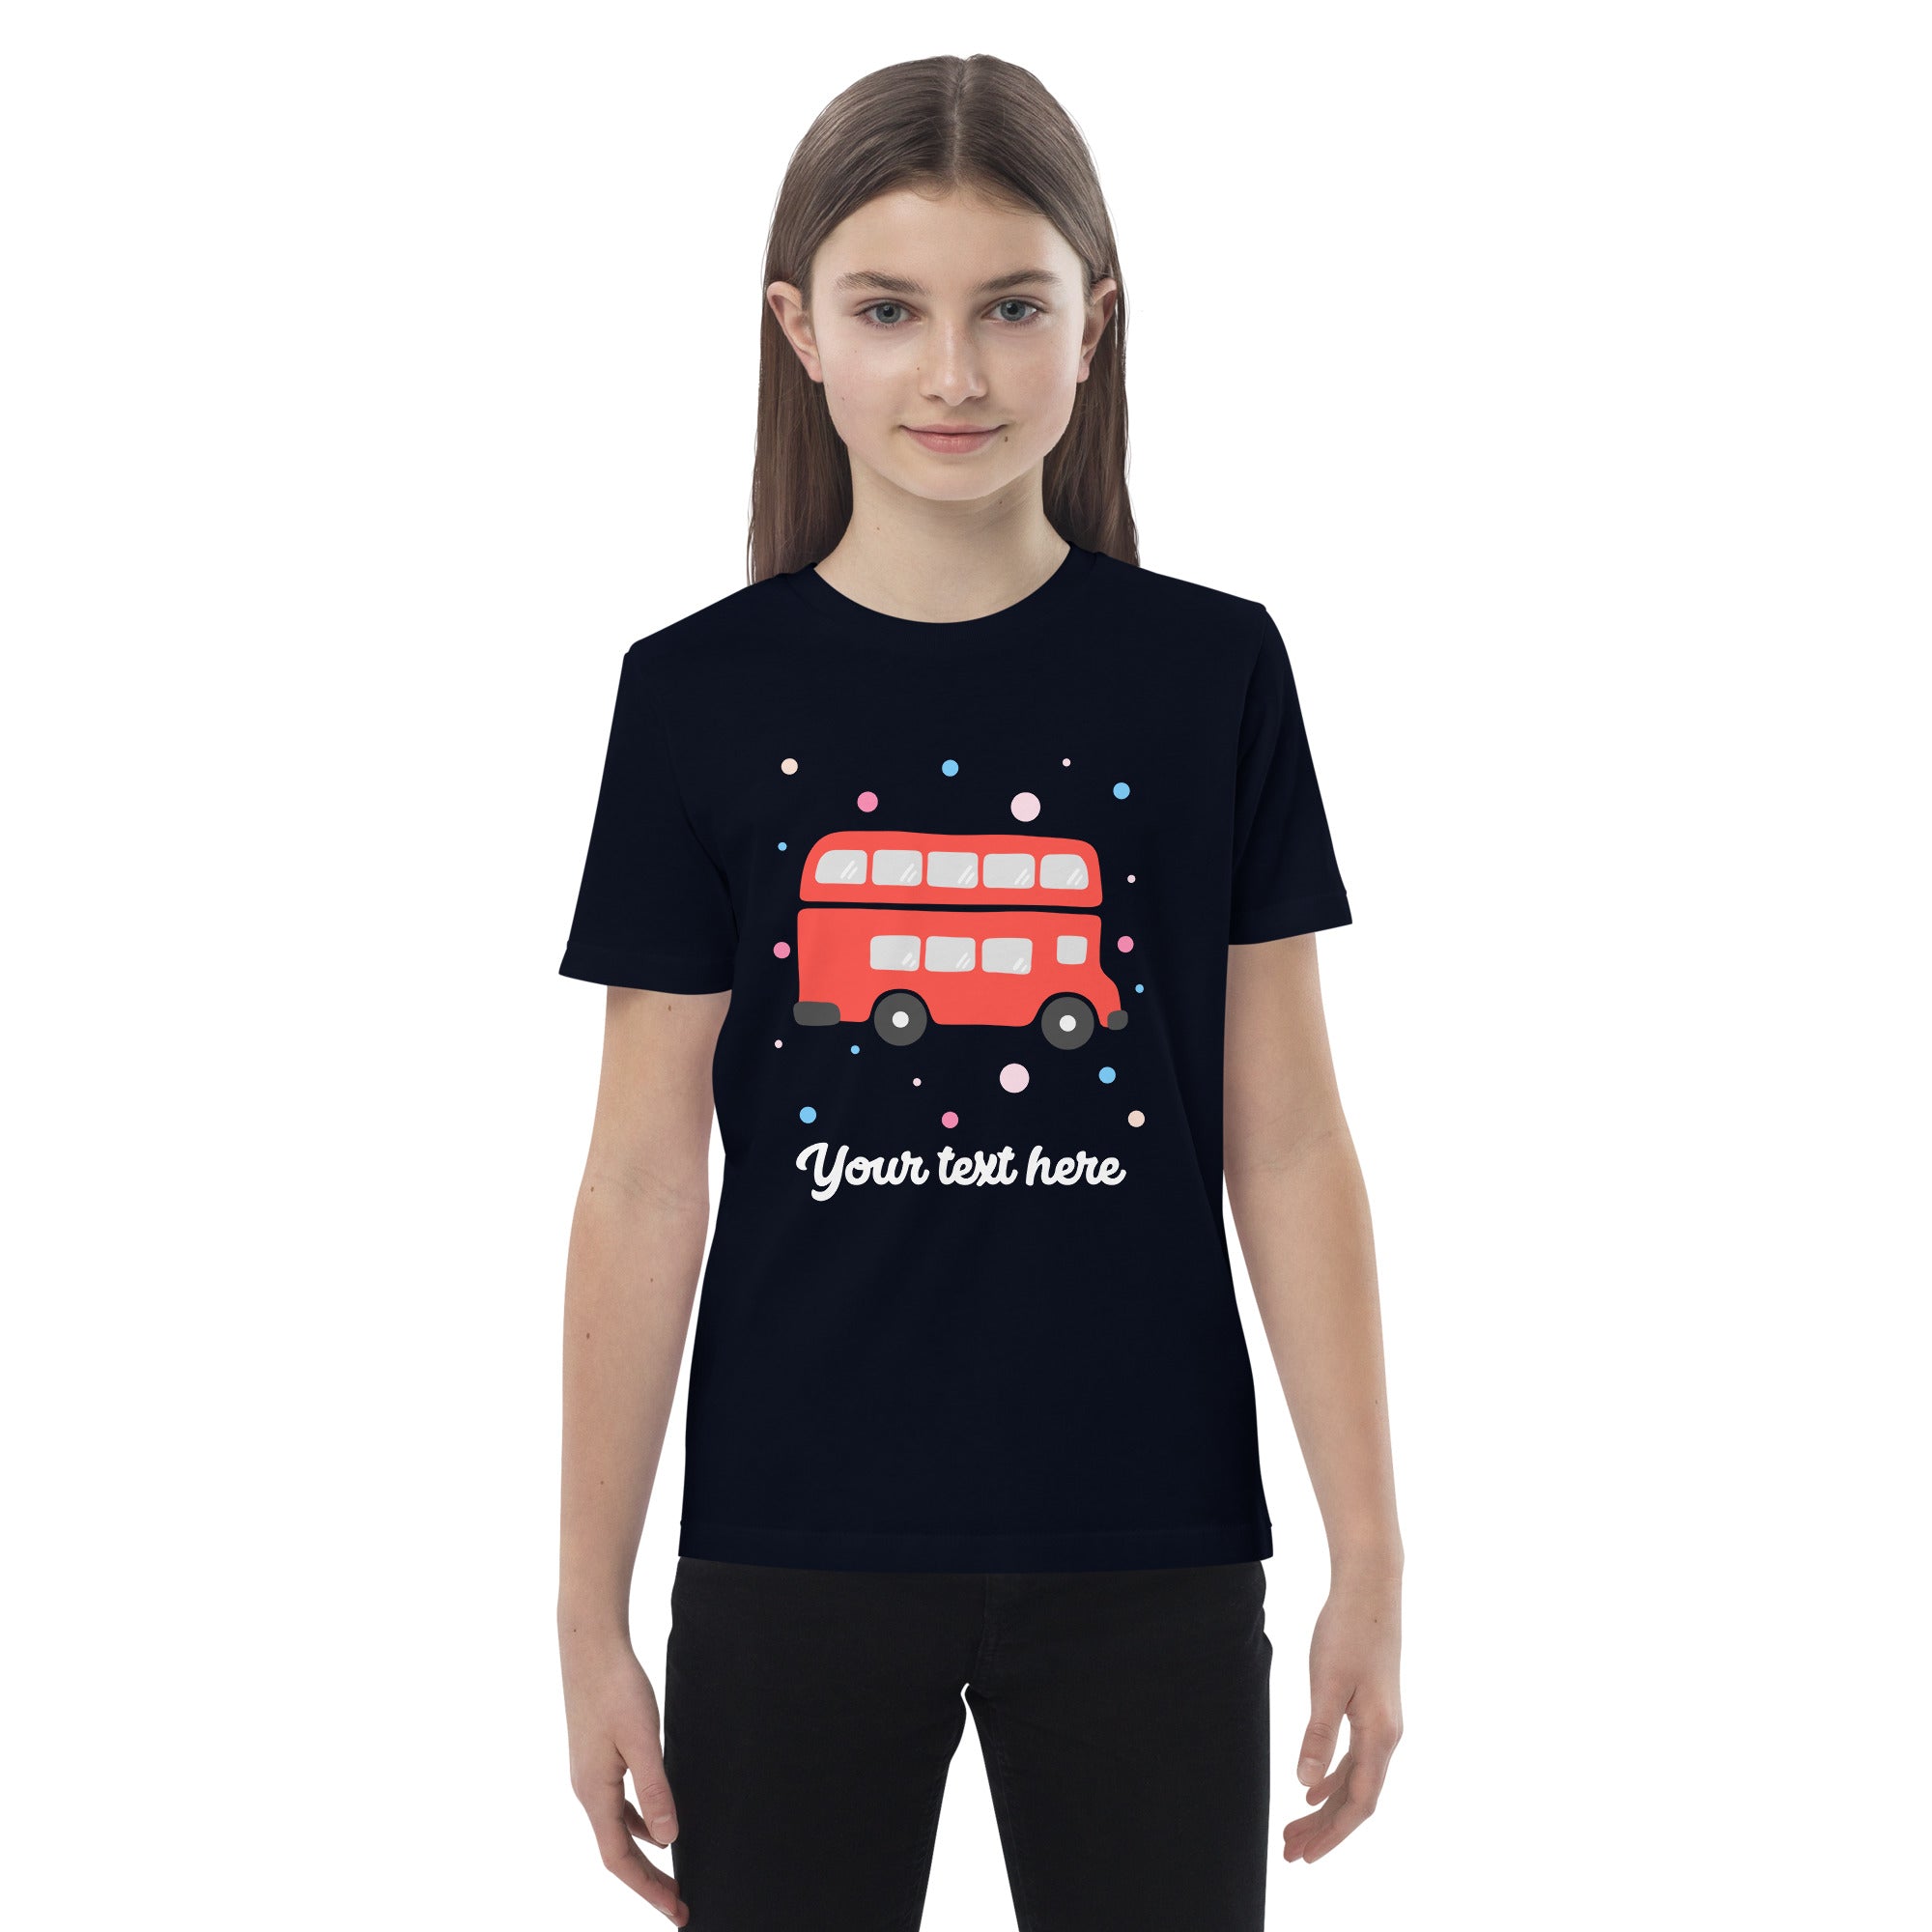 Personalised Custom Text - Organic Cotton Kids T-Shirt - London Doodles - Red Bus - Navy 3